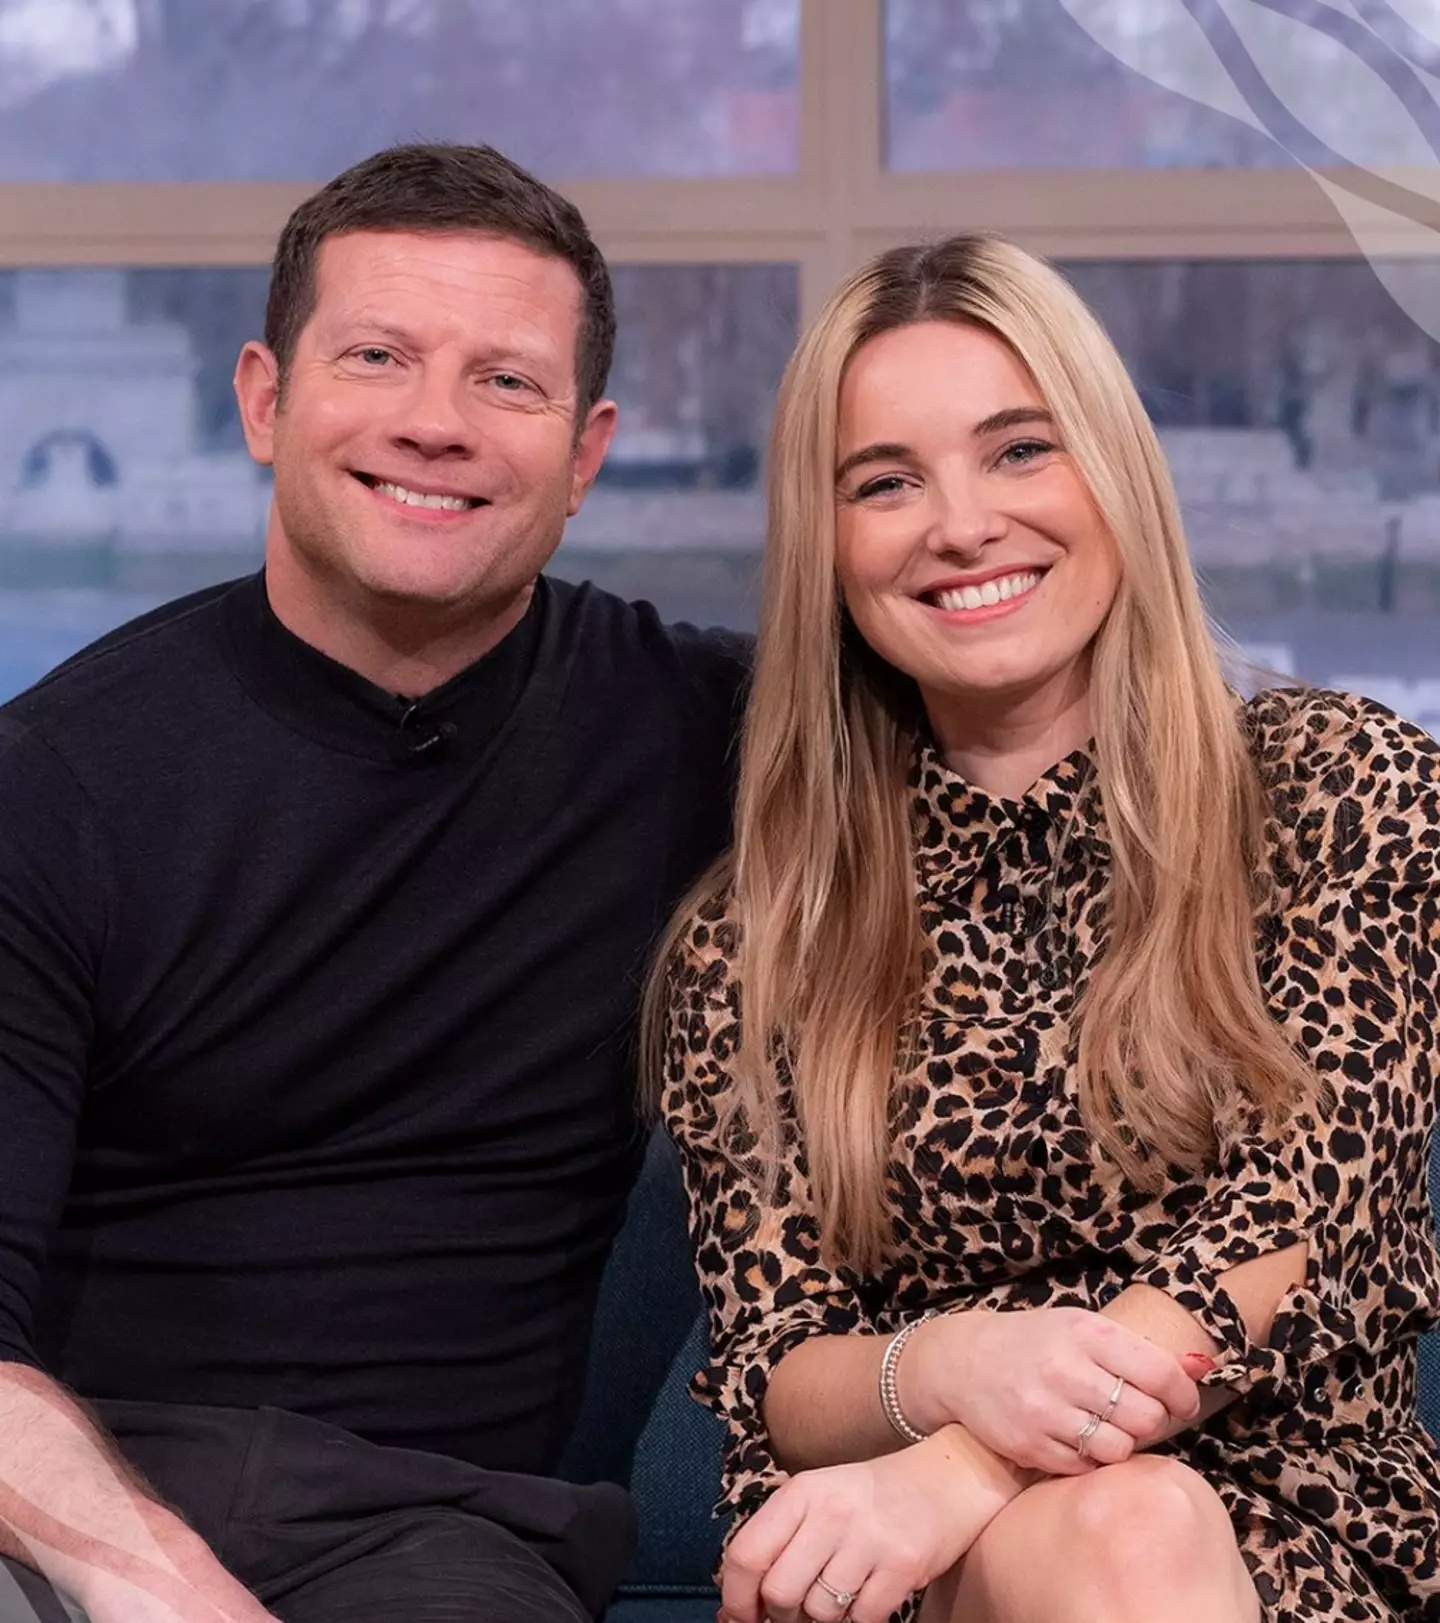 Sian Welby made her debut alongside Dermot O'Leary today (22 January).